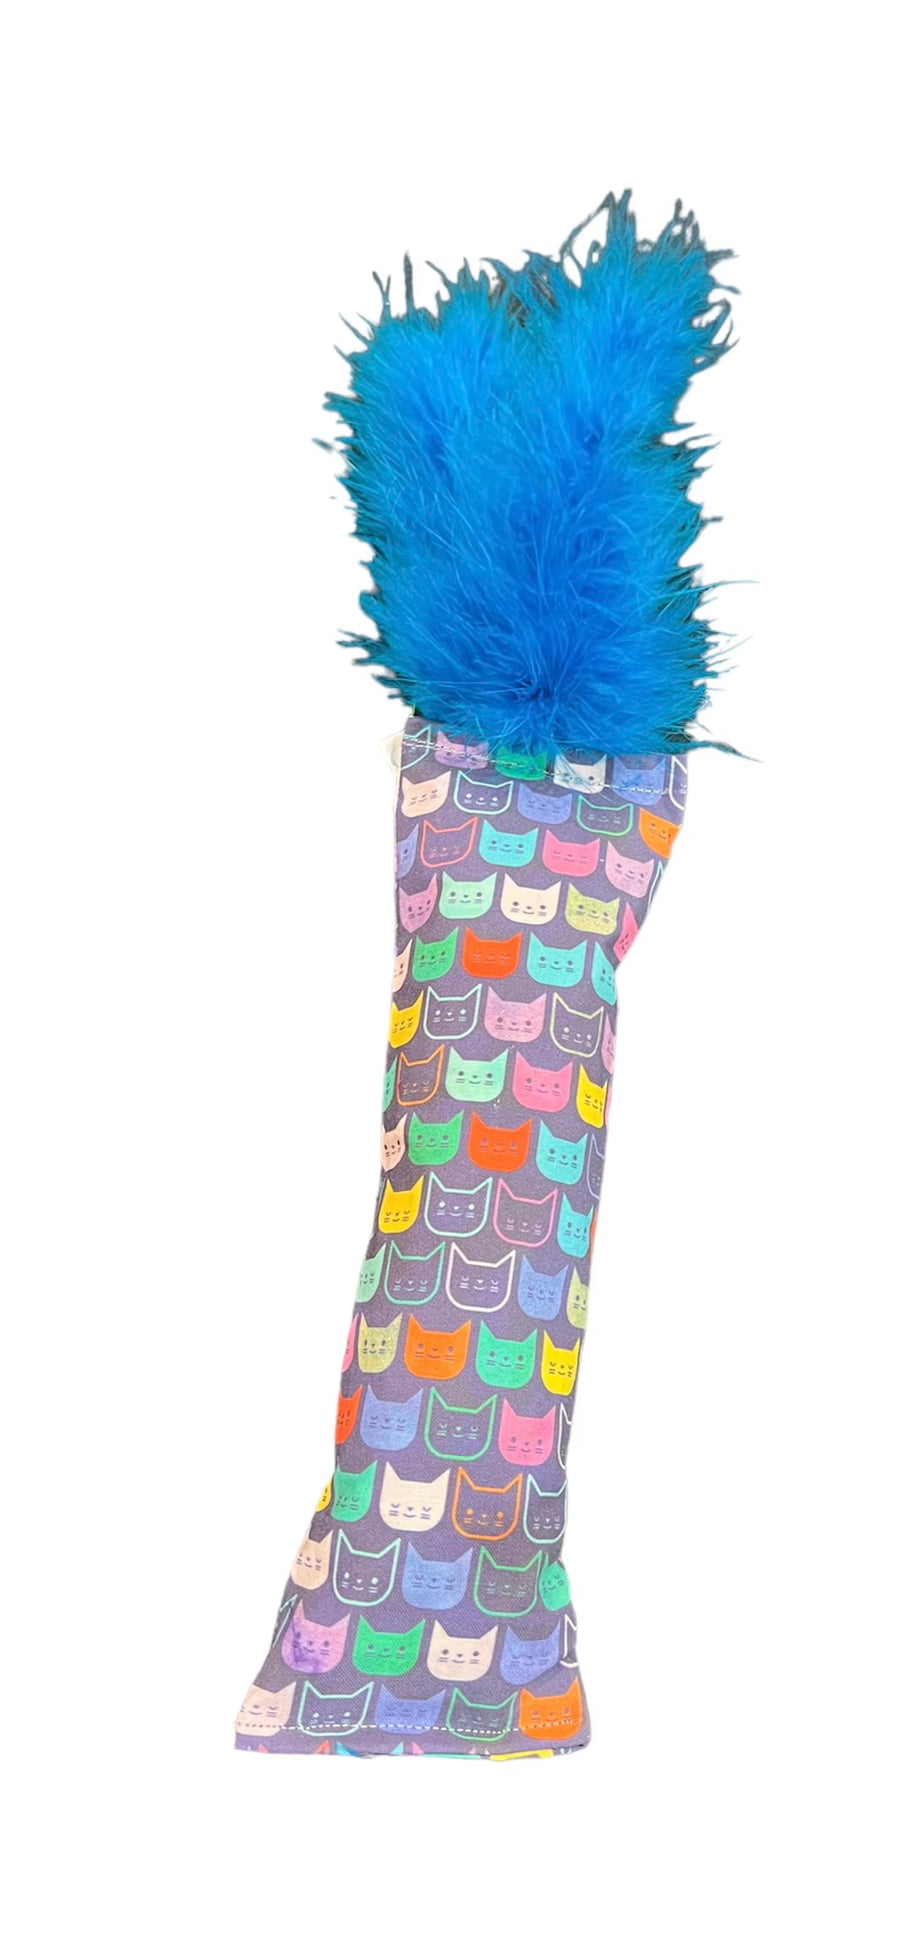 NEW!!! Colorful Kitty Heads Catnip, Silvervine and Crunch Kicker with Marabou